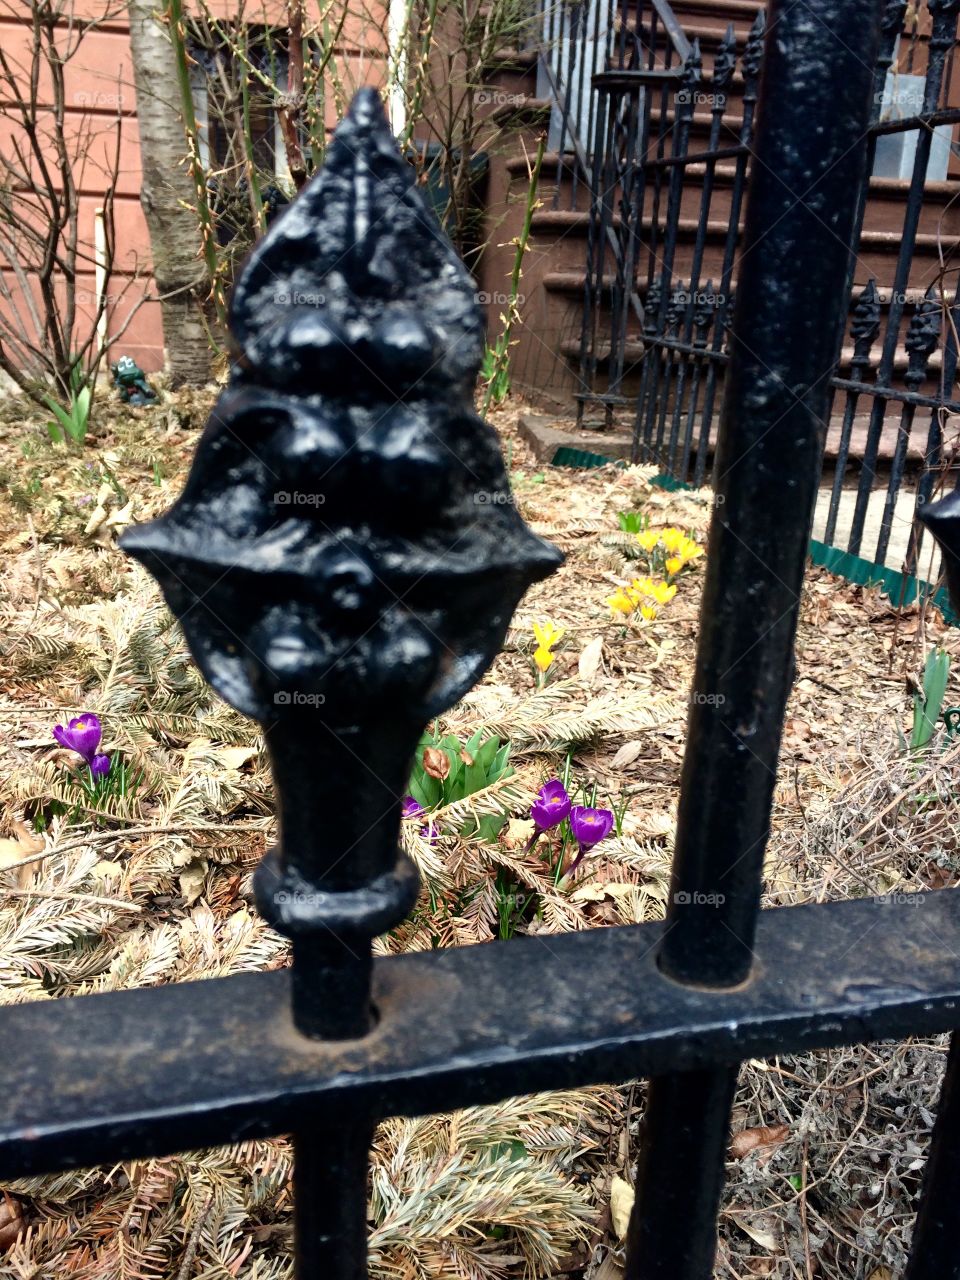 Spring crocus through the Brooklyn wrought iron fence